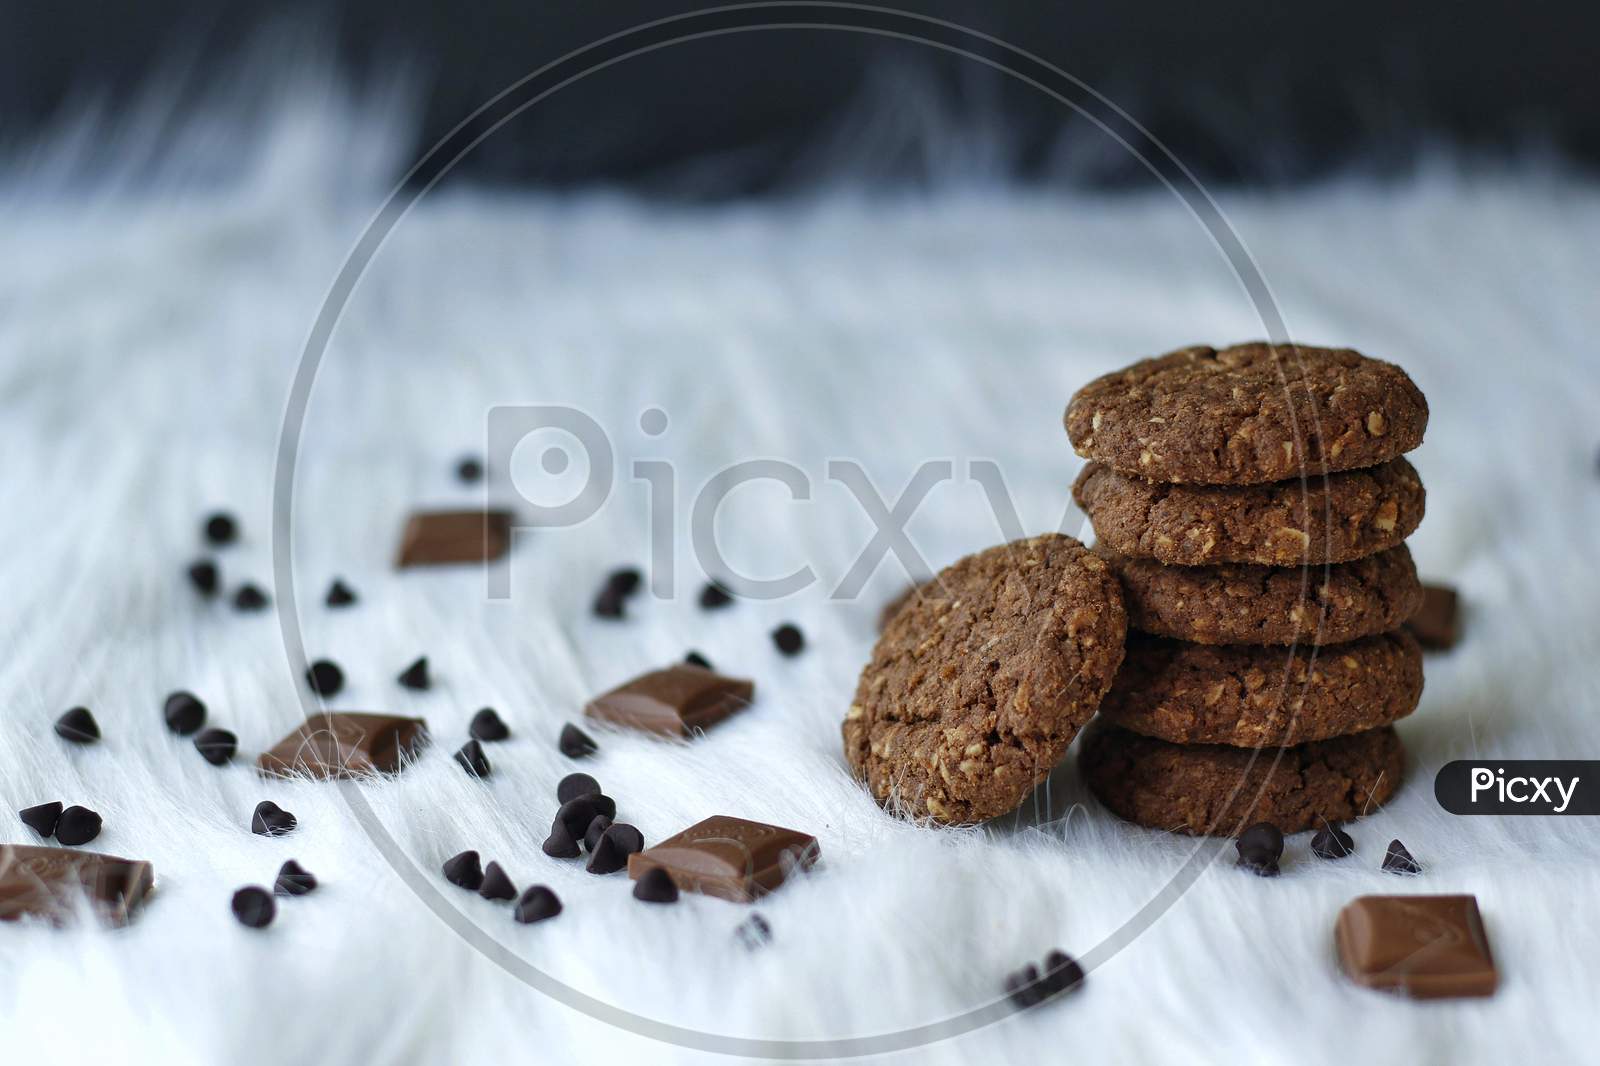 Chocolate And Oats Cookies With Chocolate Chips And Chocolate Pieces On A White Fur Background